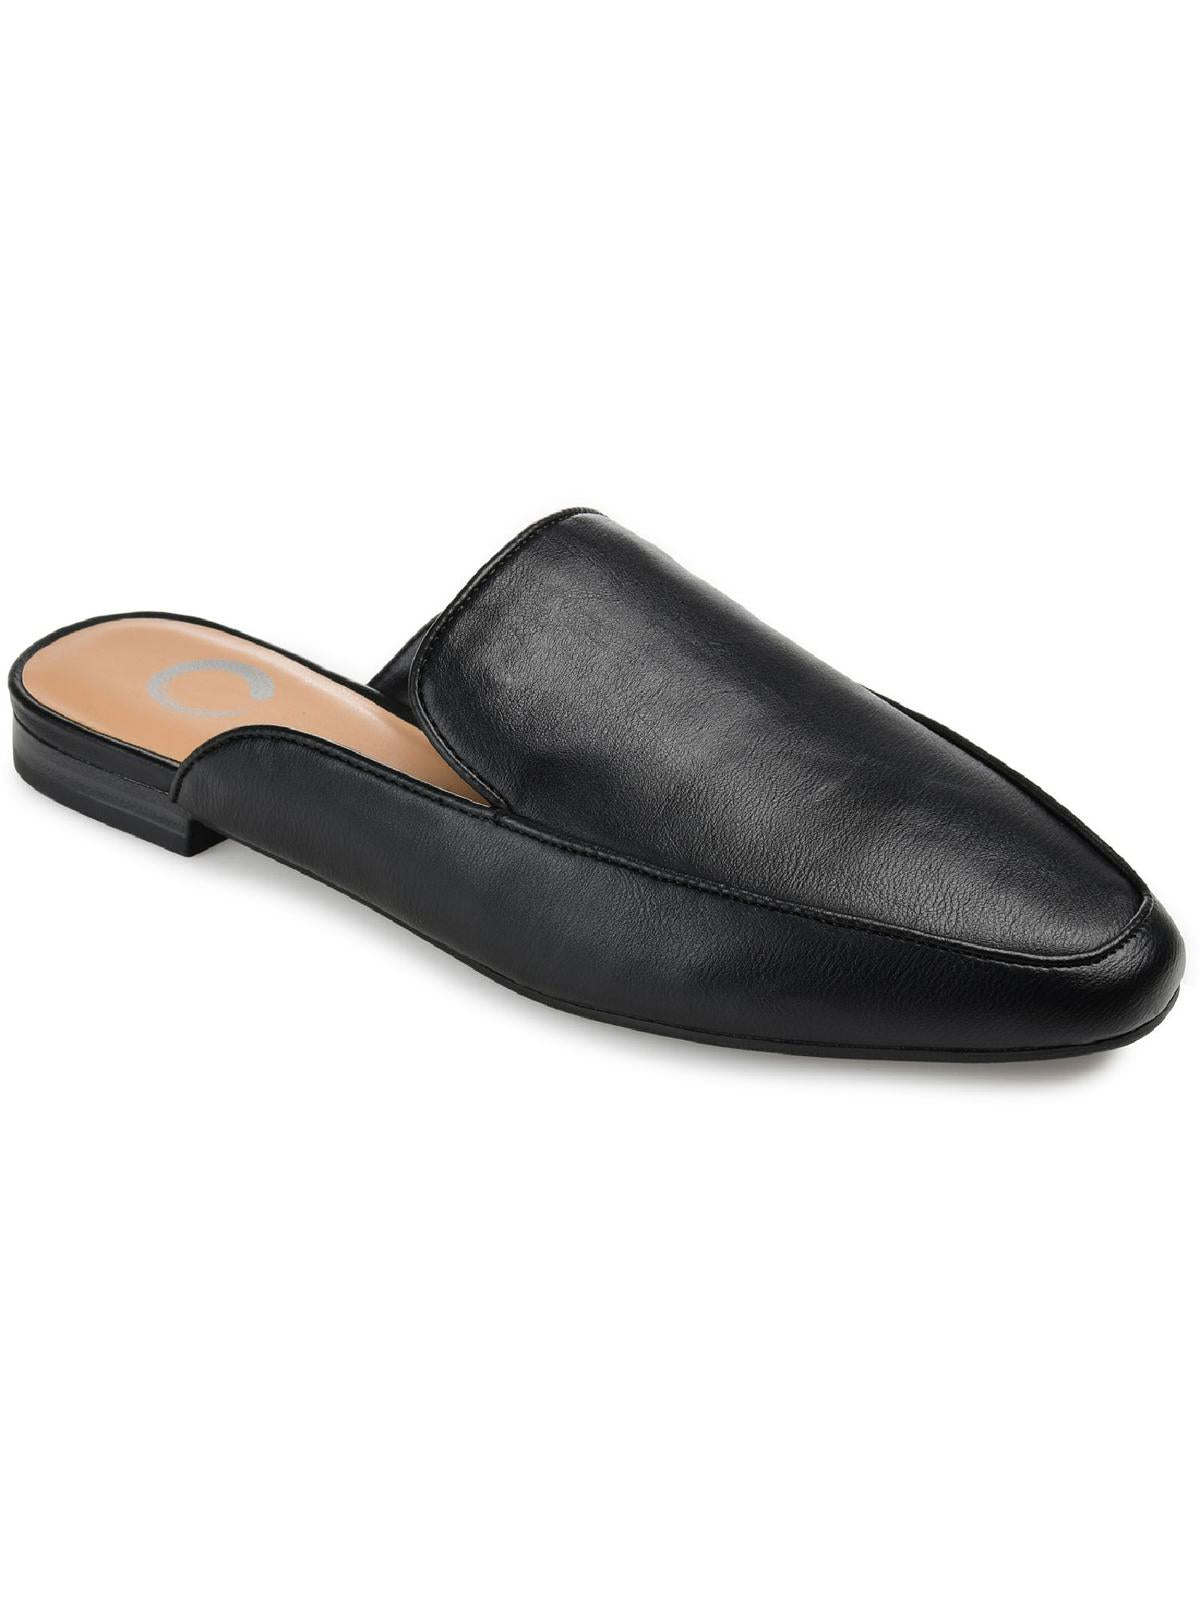 JOURNEE COLLECTION Akza Womens Man Made Slip On Loafer Mule